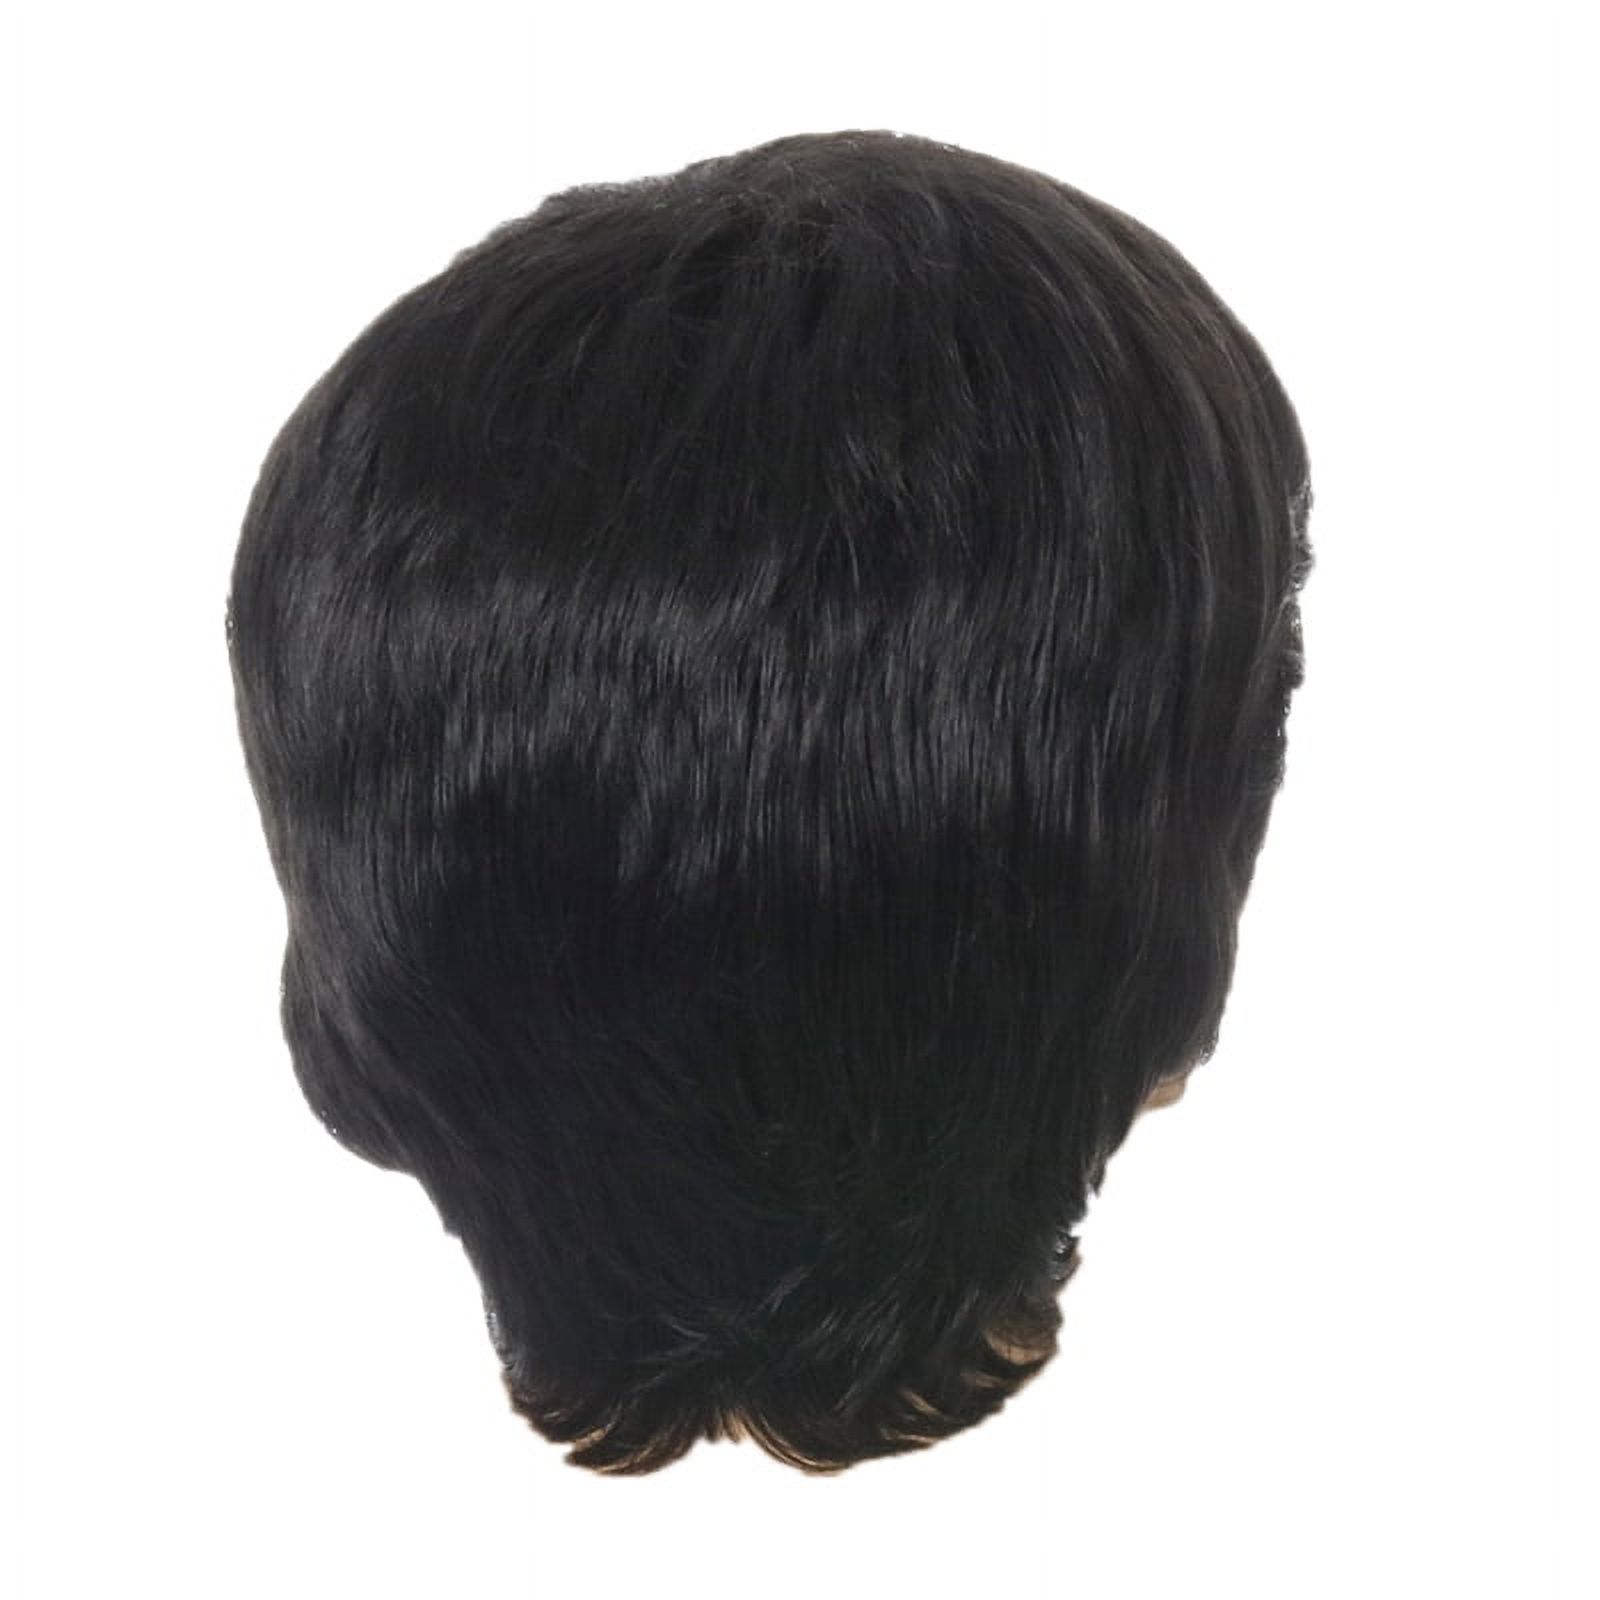 Fashion Wig Short Black Male Straight Synthetic Wig for Men Hair Fleeciness Realistic Natural Black Toupee Wigs - image 1 of 8